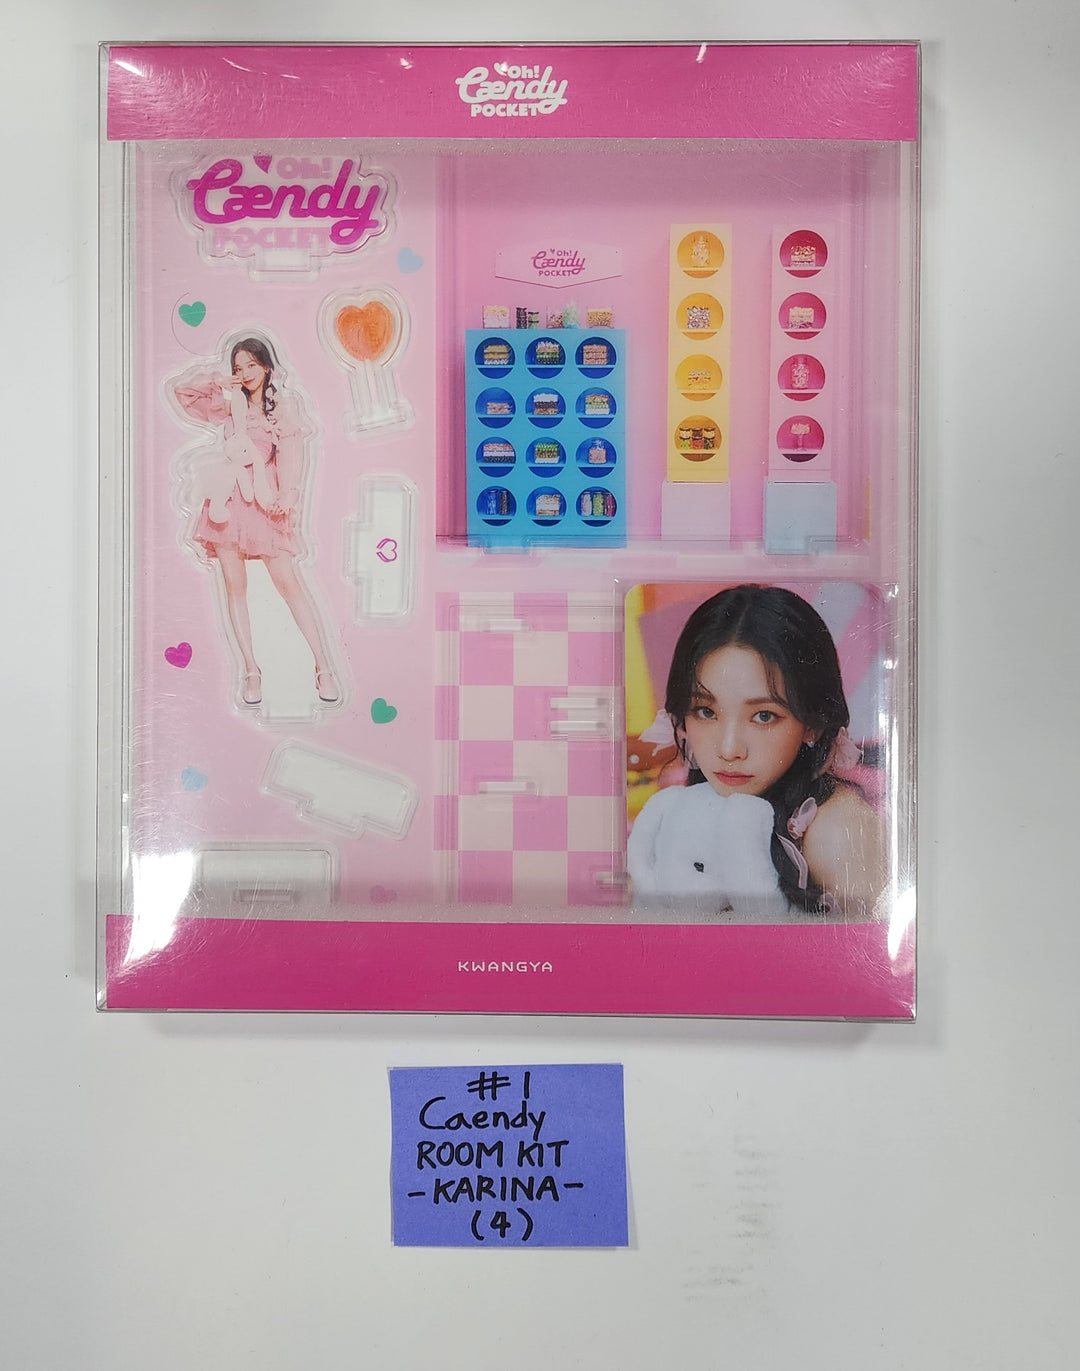 Aespa "Oh! Caendy Pocket. Part 2" - Official MD [Room Kit, Glass Cup, Ring]